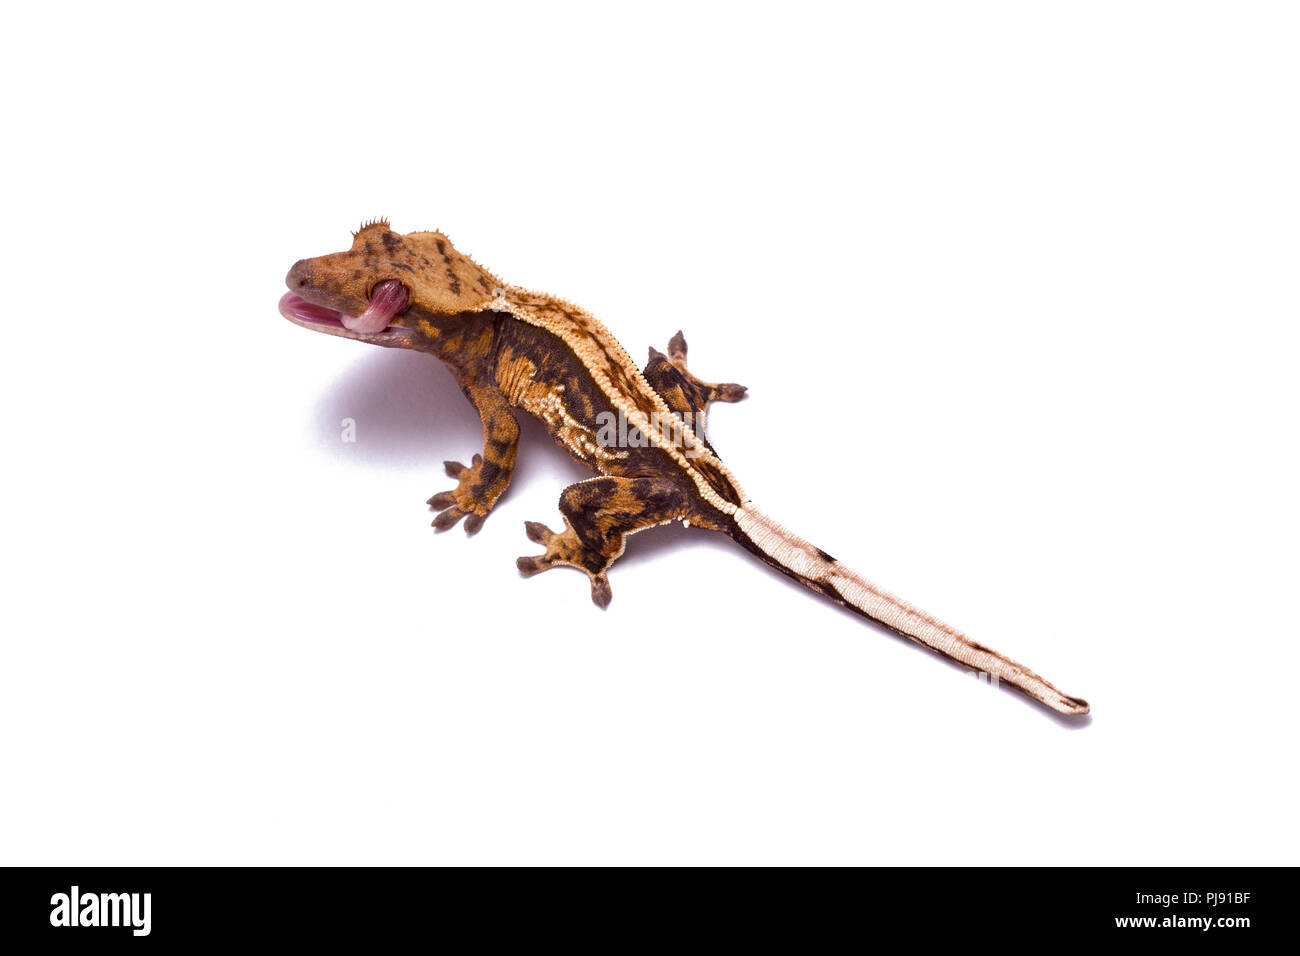 Crested gecko licking his eye. White background. Stock Photo